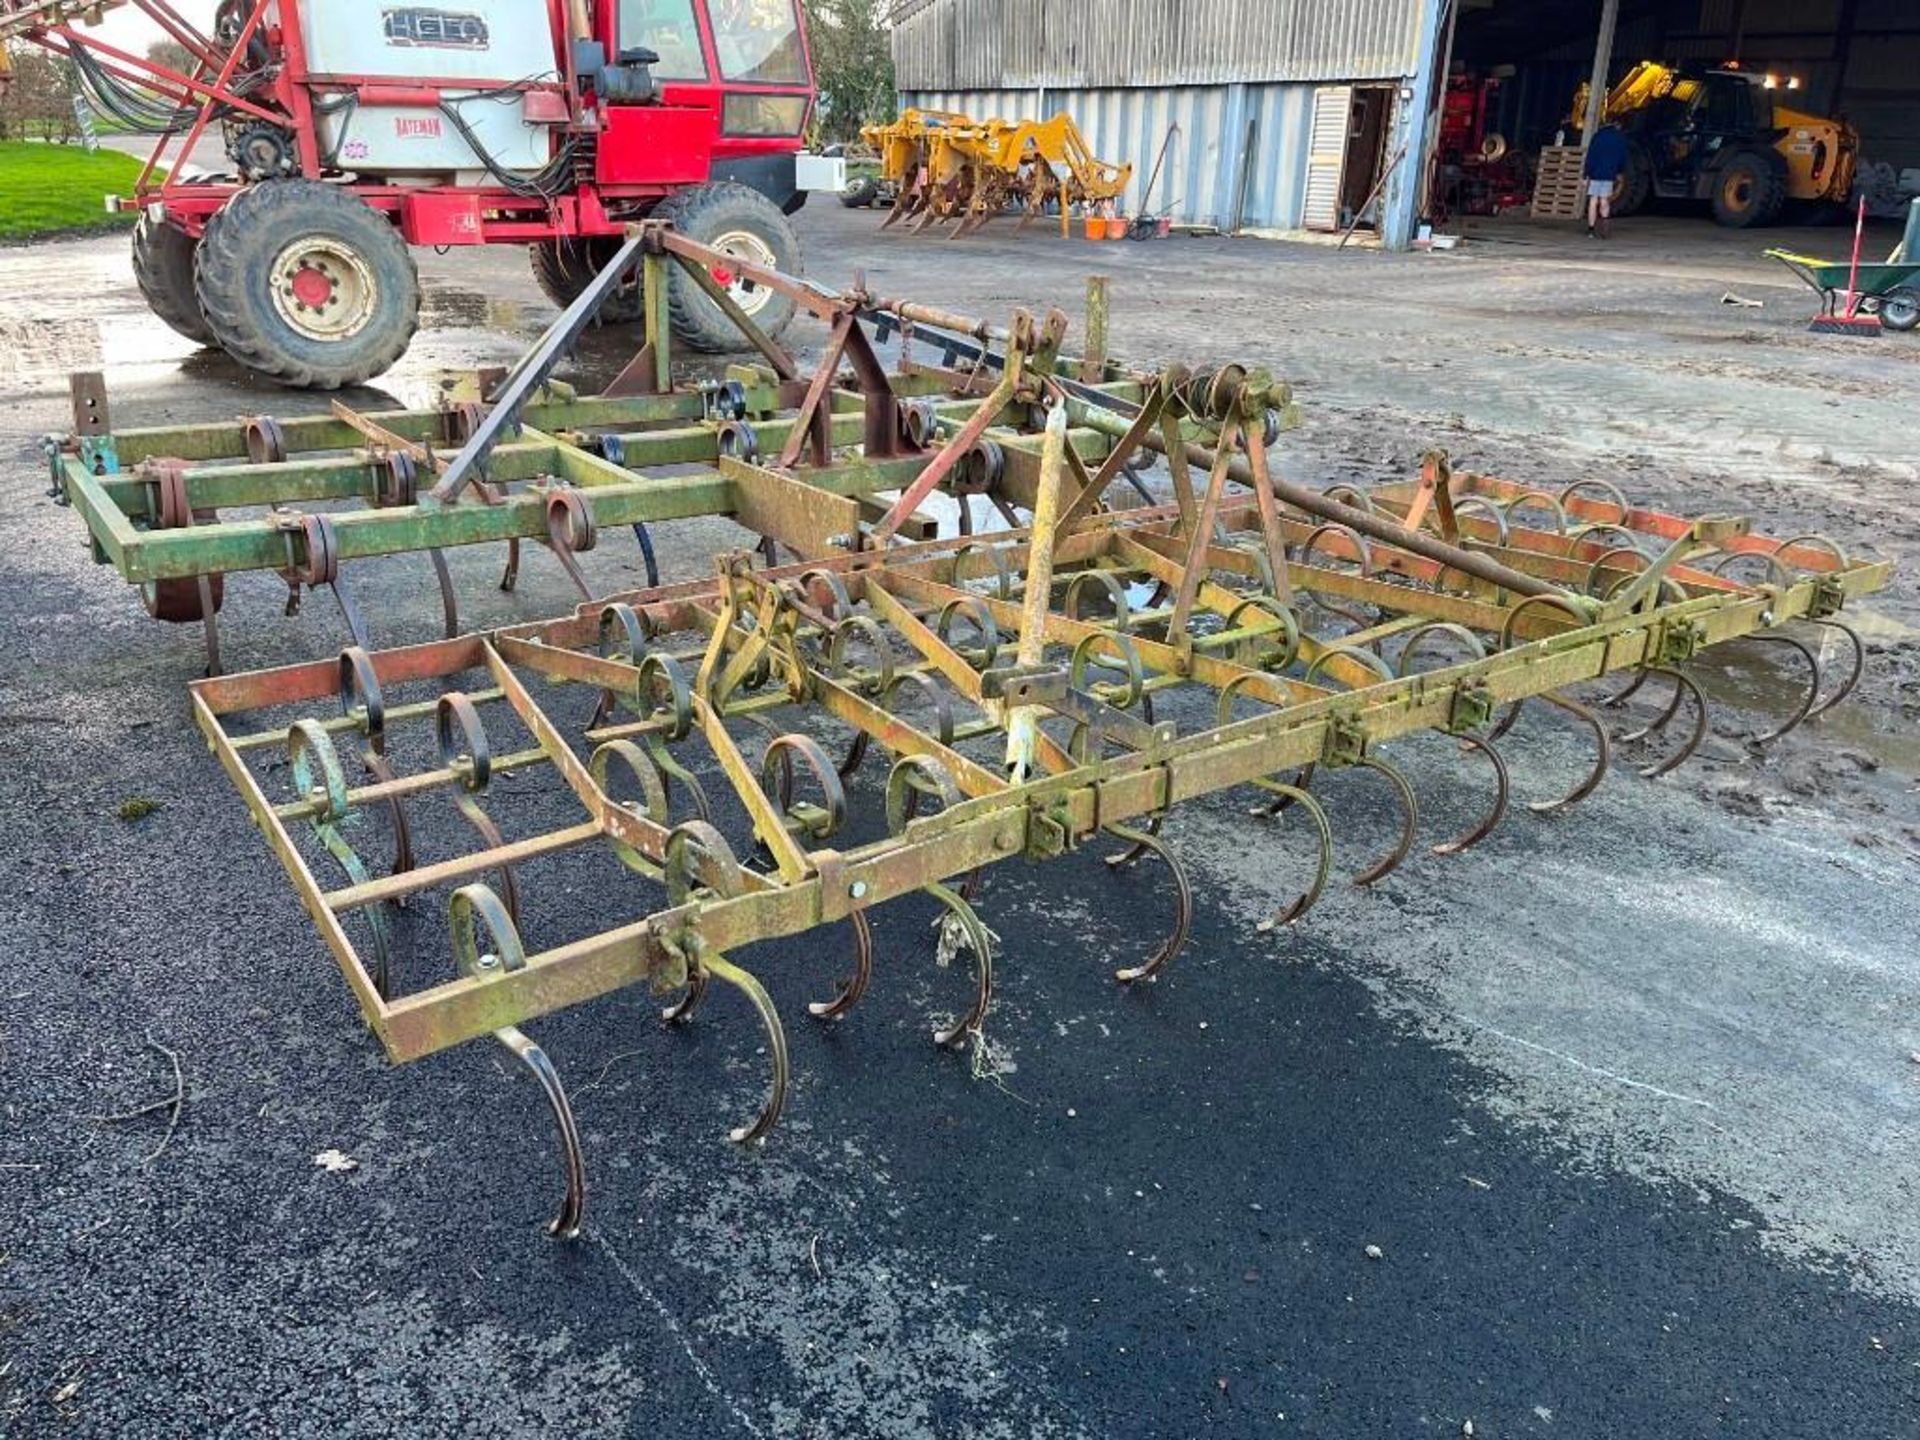 Cousins 4m Pigtail Tine Cultivator c/w Detachable 4m Rear Spring Tine Harrow - (Suffolk) - Image 4 of 6